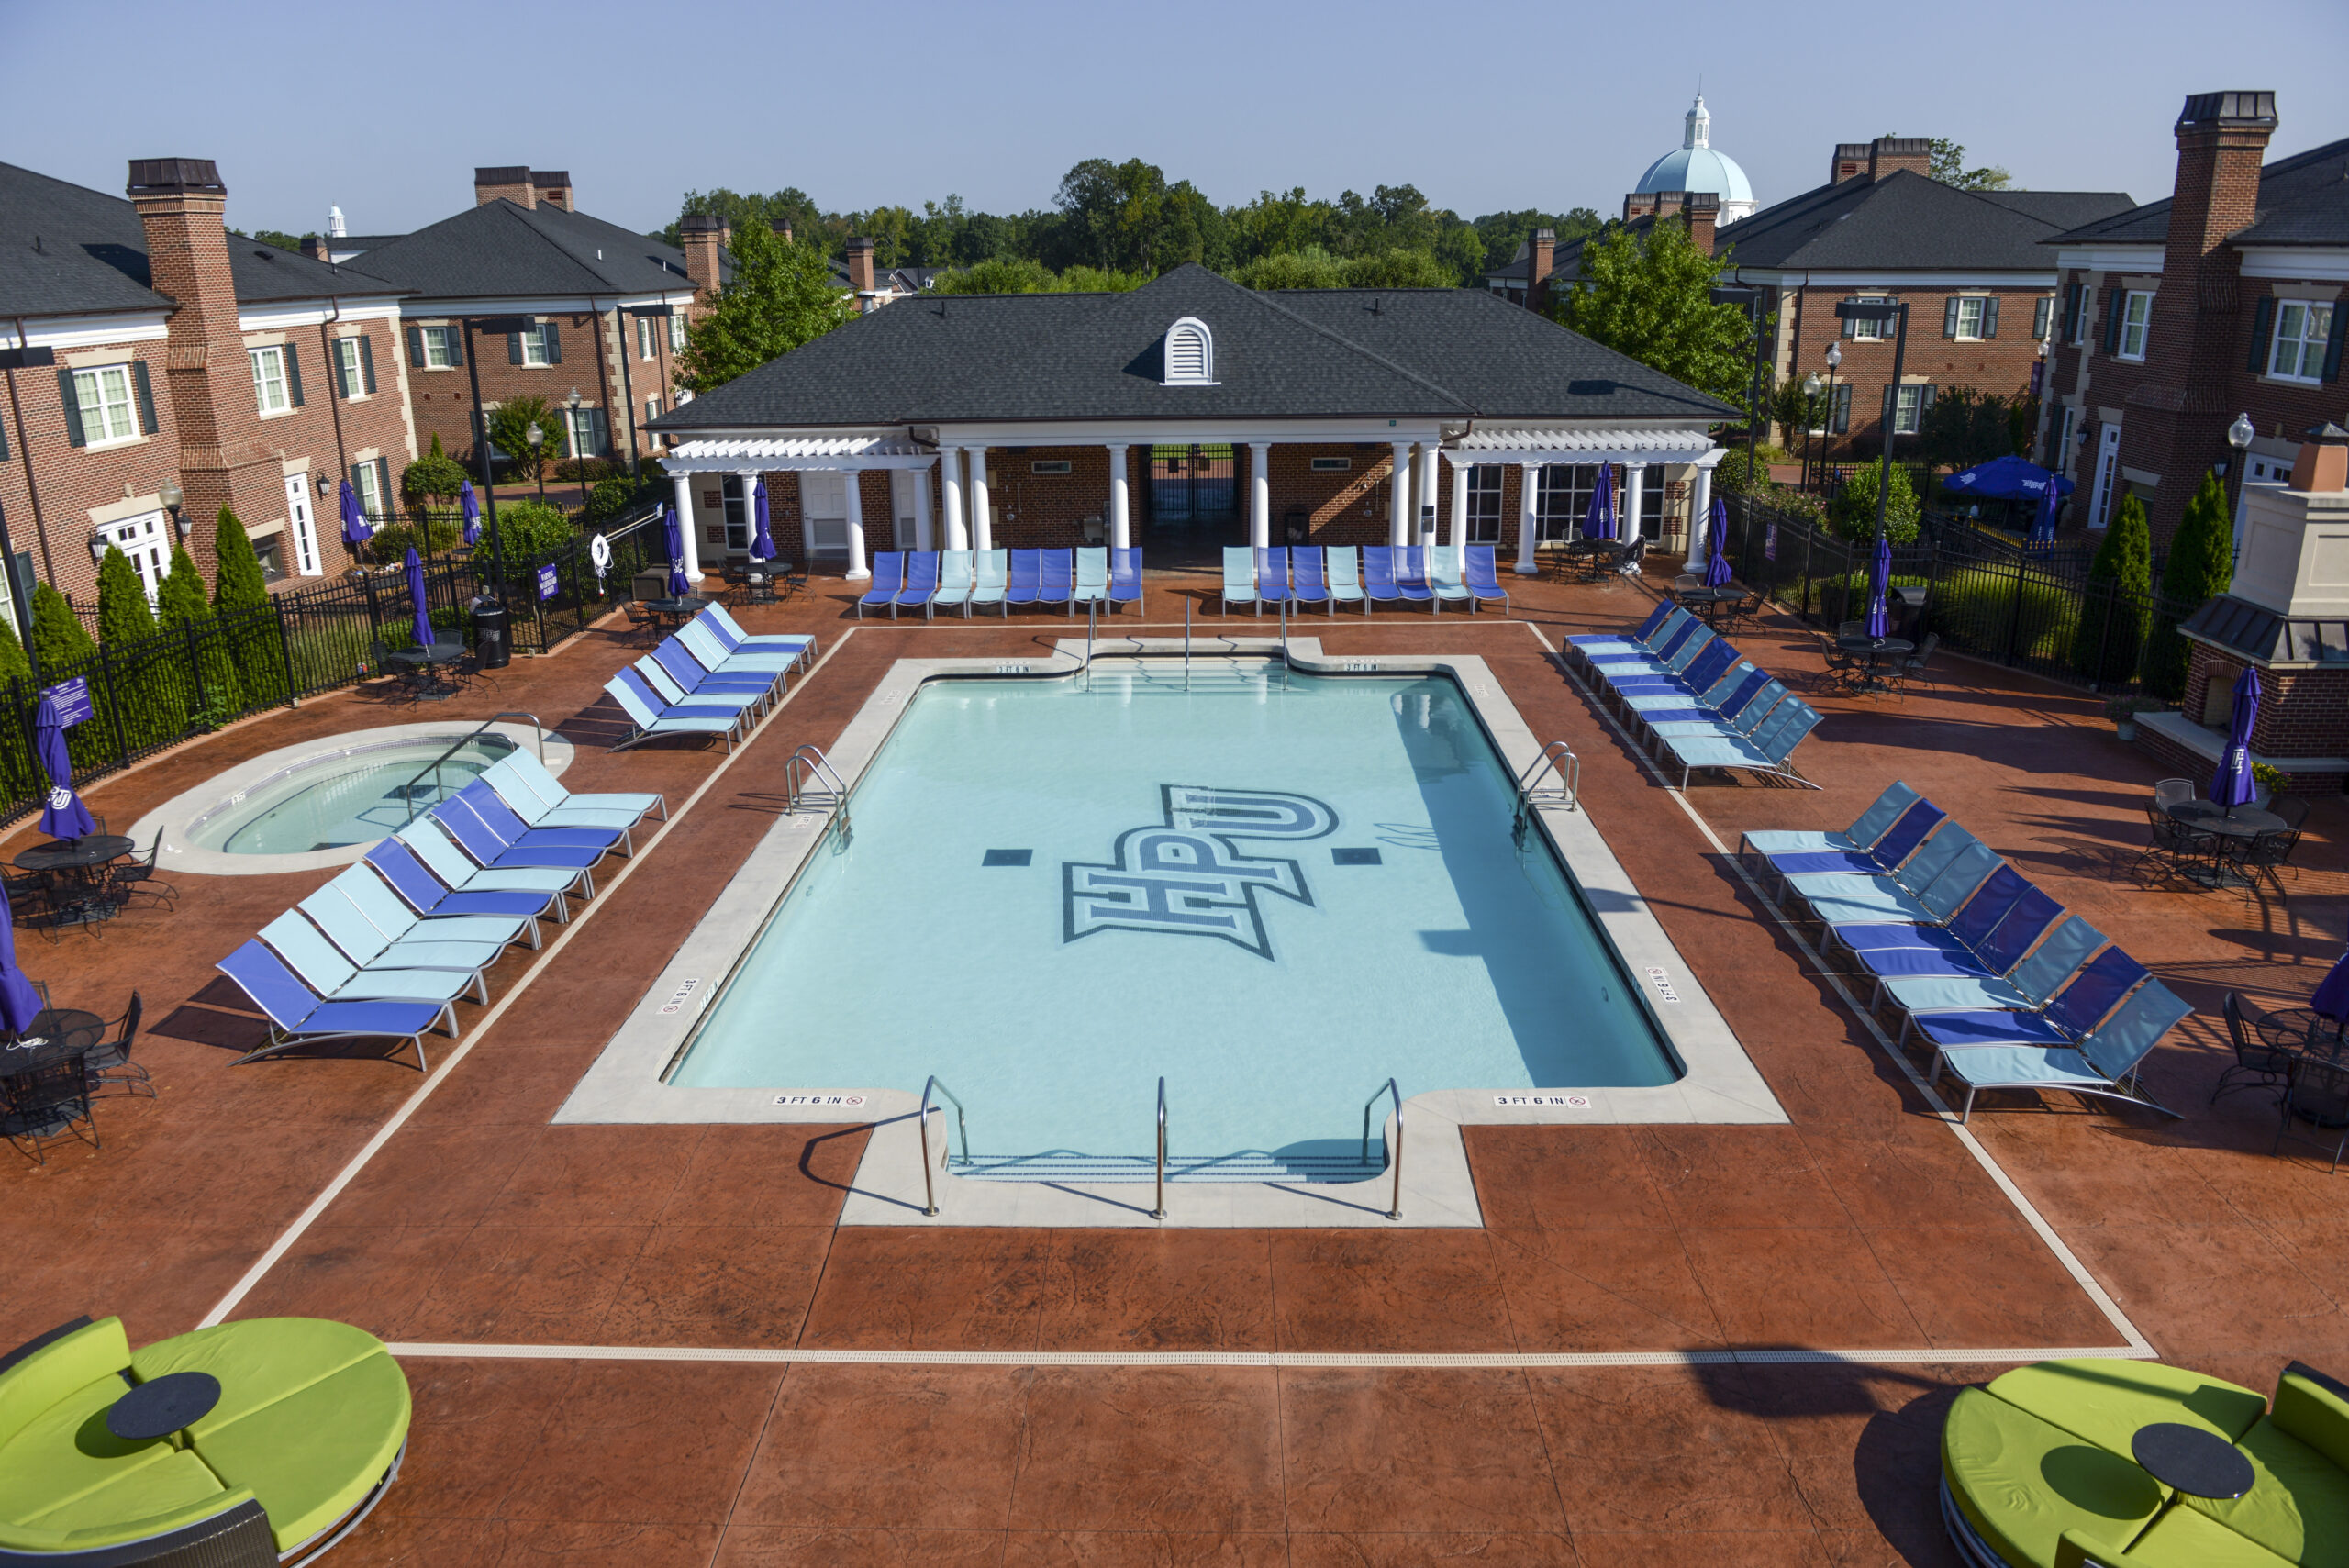 A swimming pool at High Point University surrounding by brick buildings